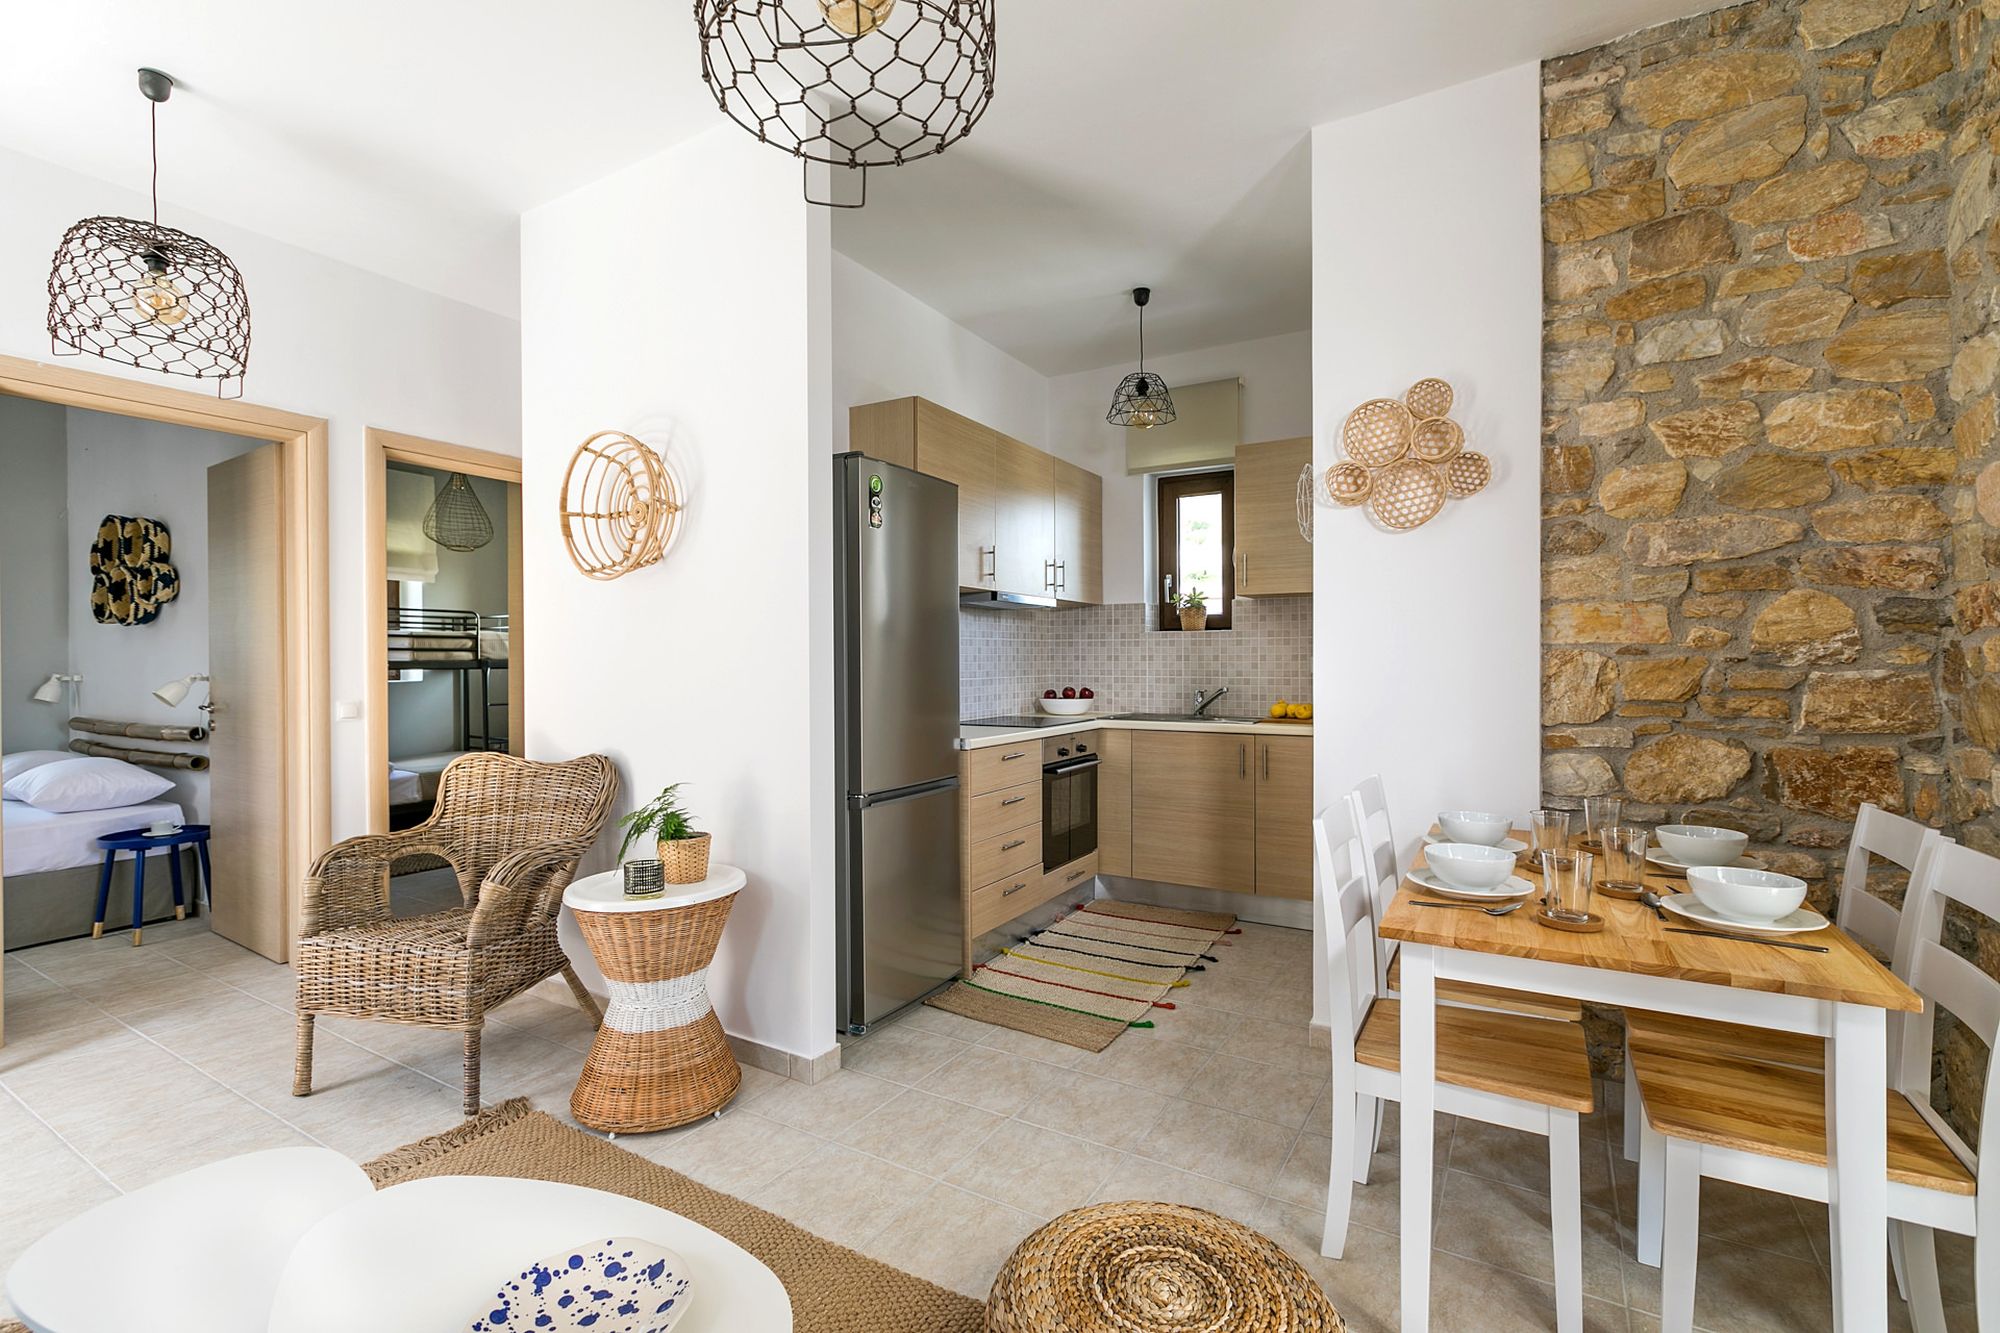 A stone-built residence decorated in boho style with two bedrooms, one with a double bed and a second one with bunk beds, a kitchen and a dining table with four chairs.